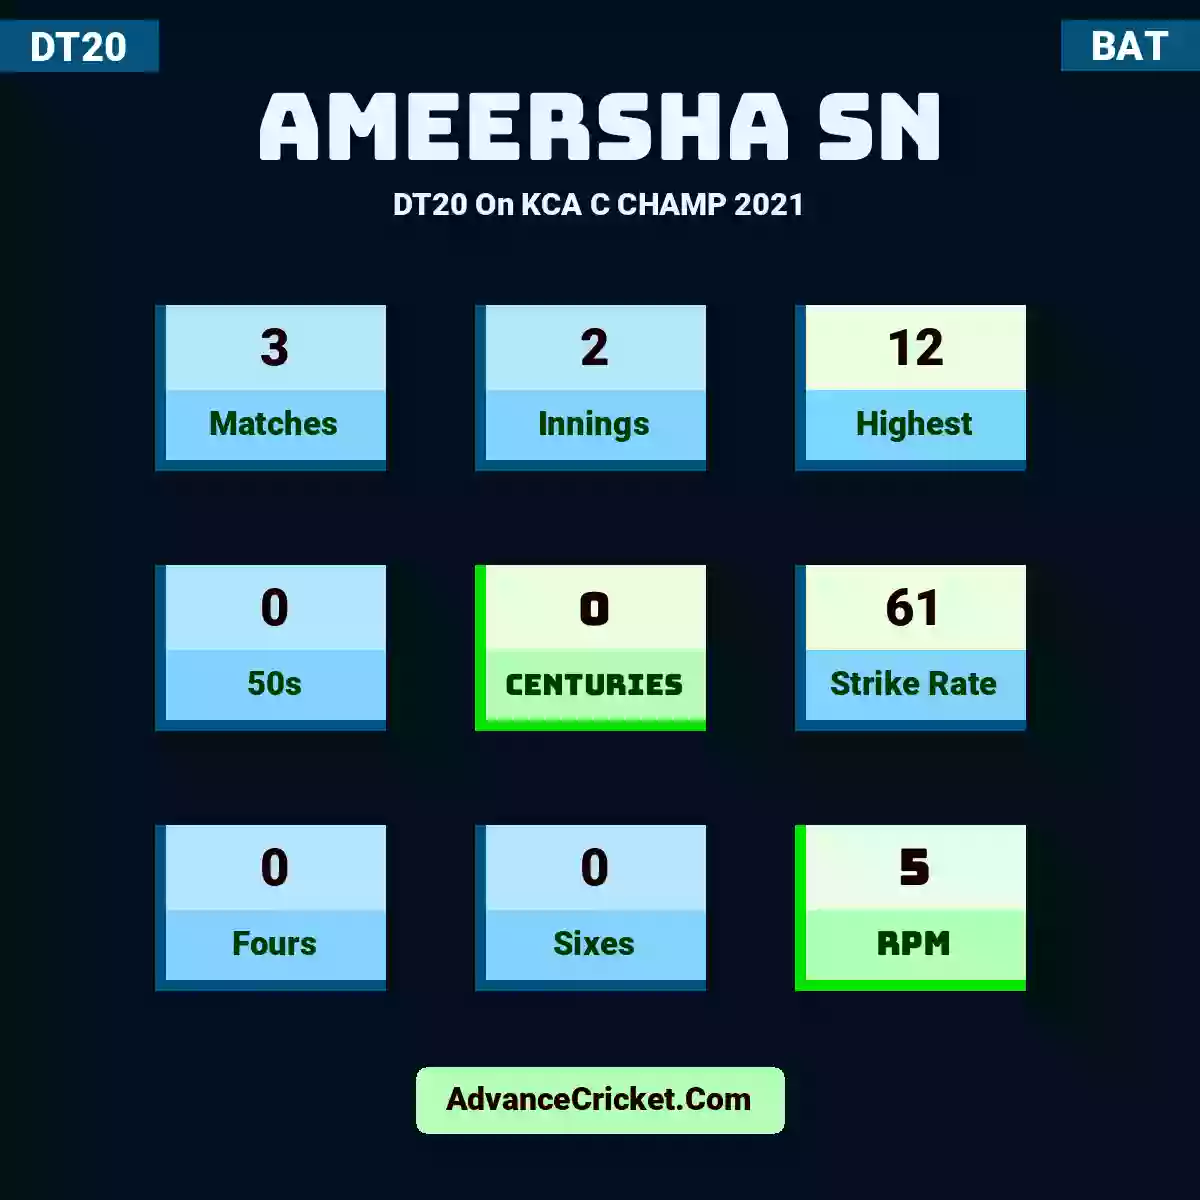 Ameersha SN DT20  On KCA C CHAMP 2021, Ameersha SN played 3 matches, scored 12 runs as highest, 0 half-centuries, and 0 centuries, with a strike rate of 61. A.SN hit 0 fours and 0 sixes, with an RPM of 5.